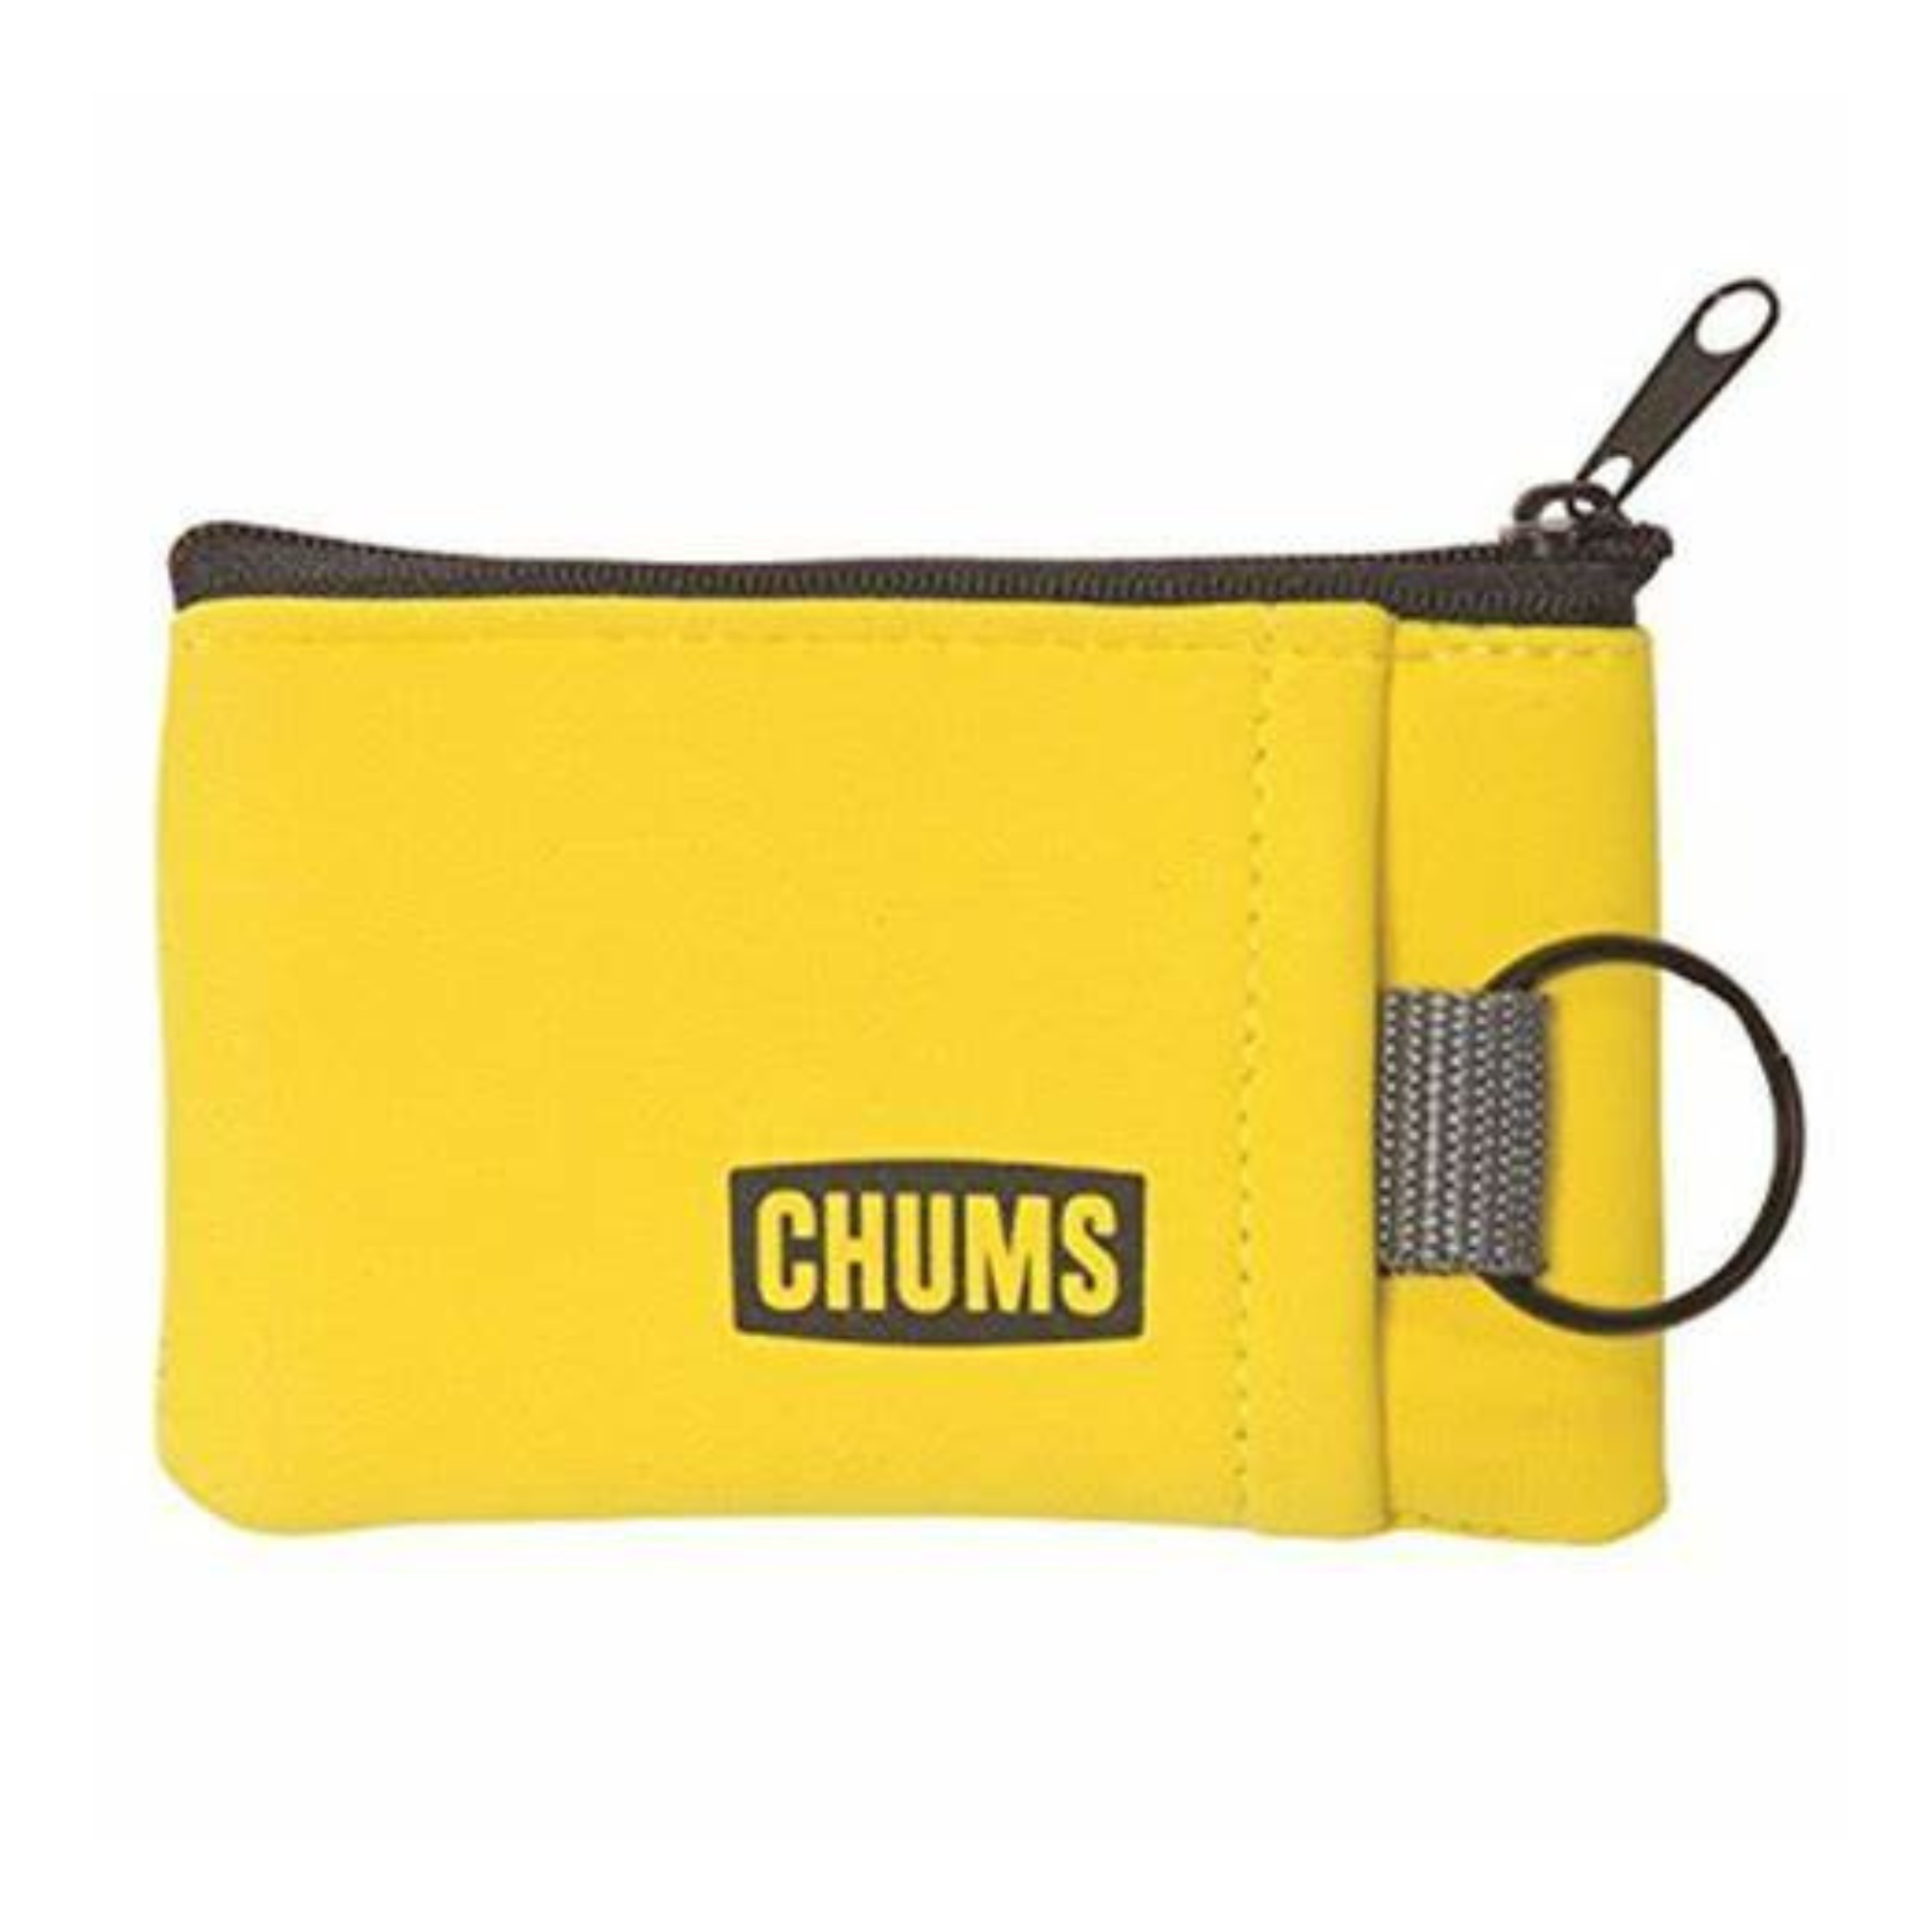 Chums Marsupial Floating Wallet and Keychain